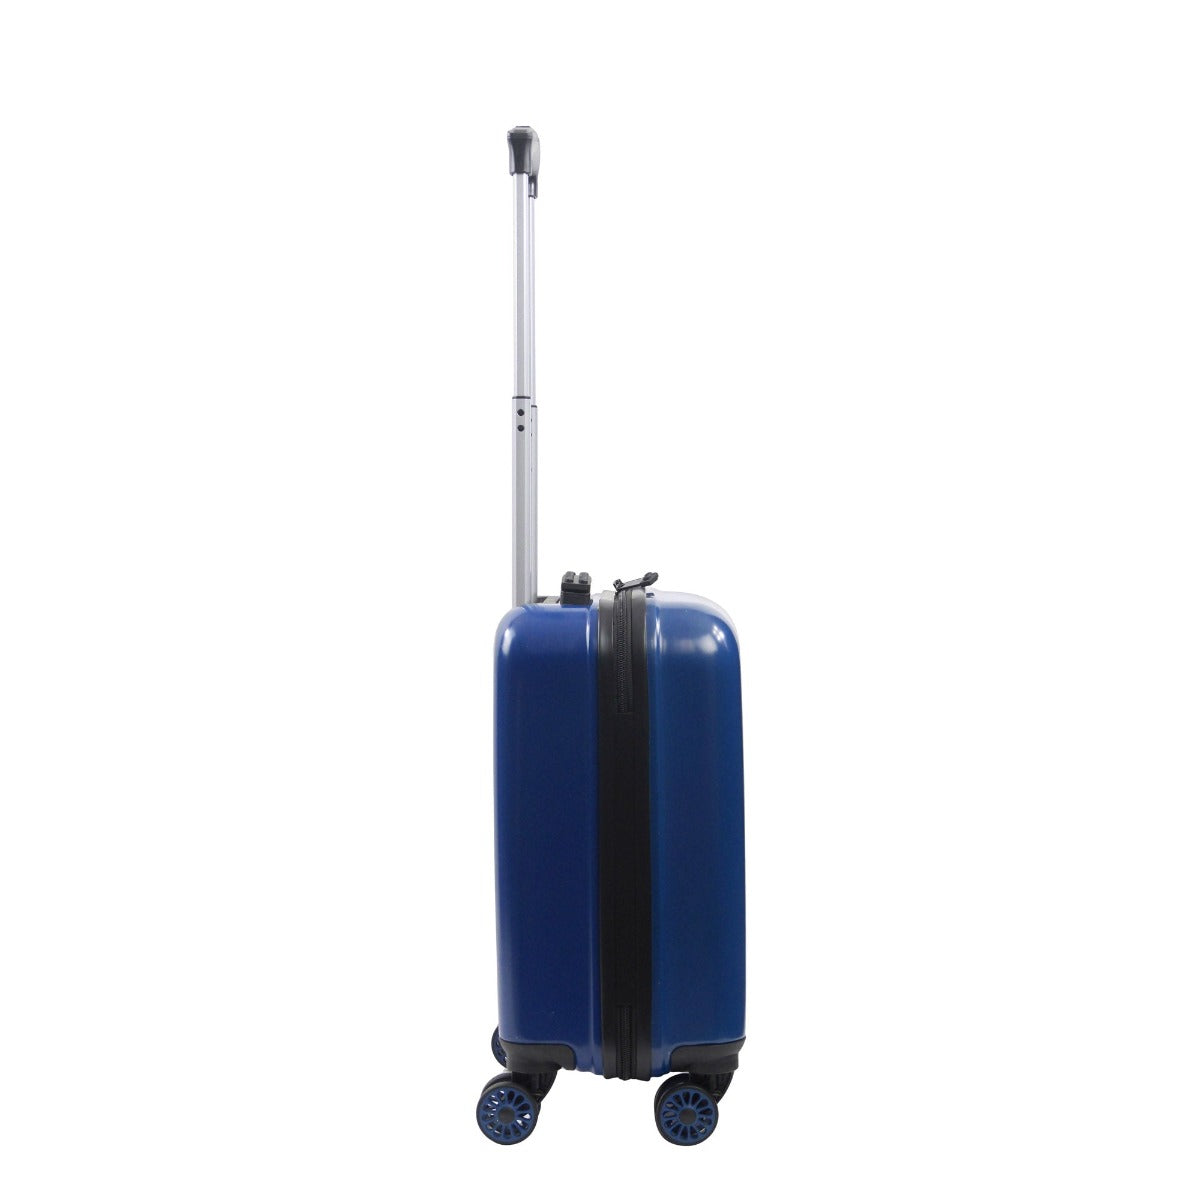 Blue Playdate Lego City Awaits 18" luggage - best carry-on spinner suitcase for kids